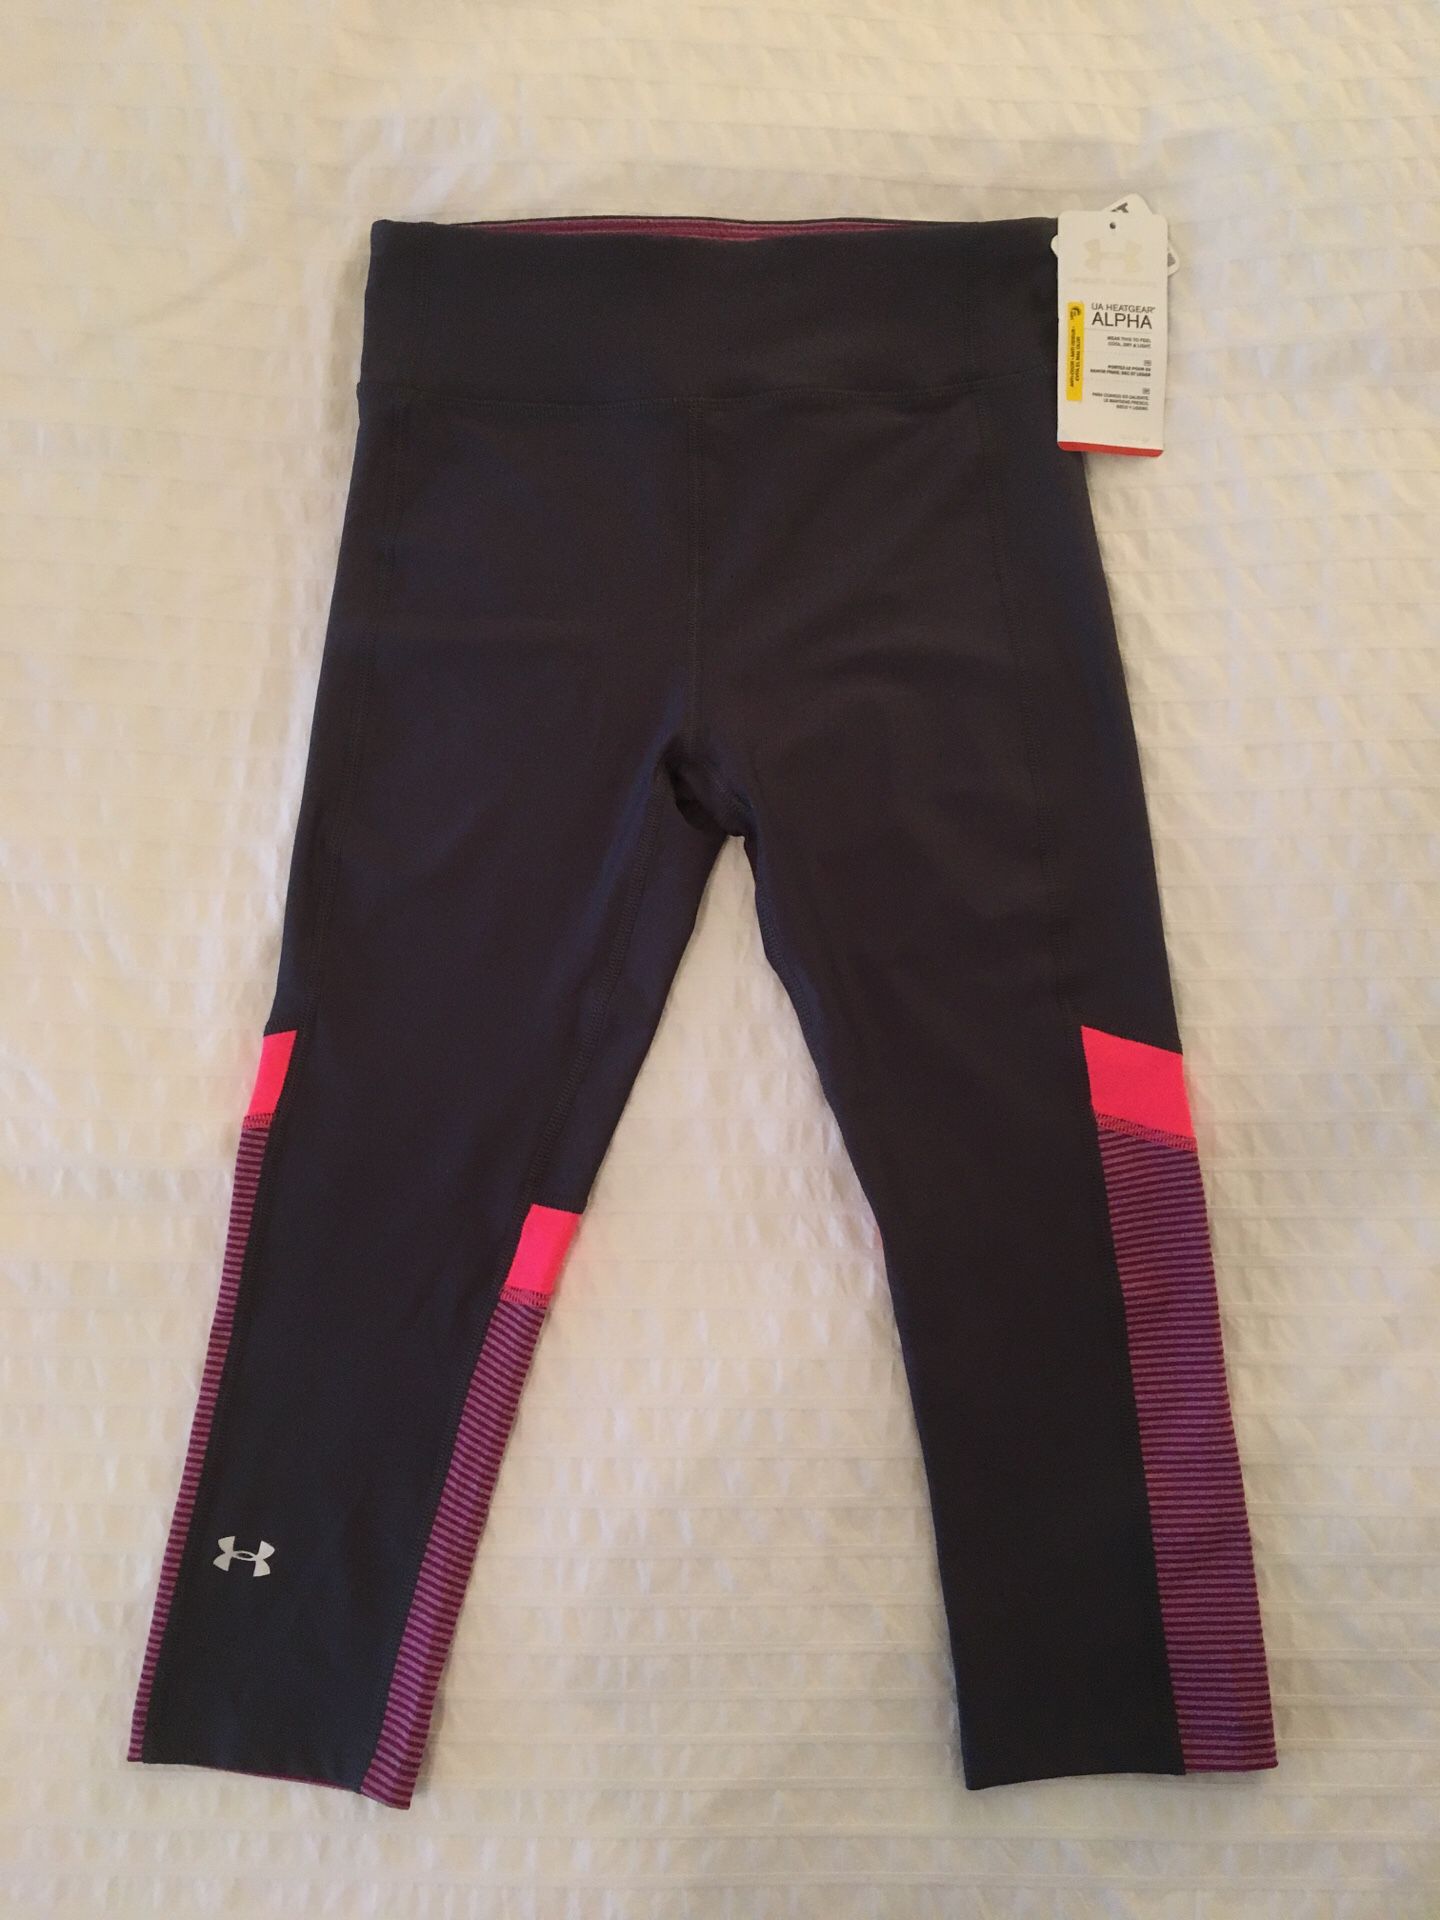 Under Armour Cropped Legging/Workout Pant - Small